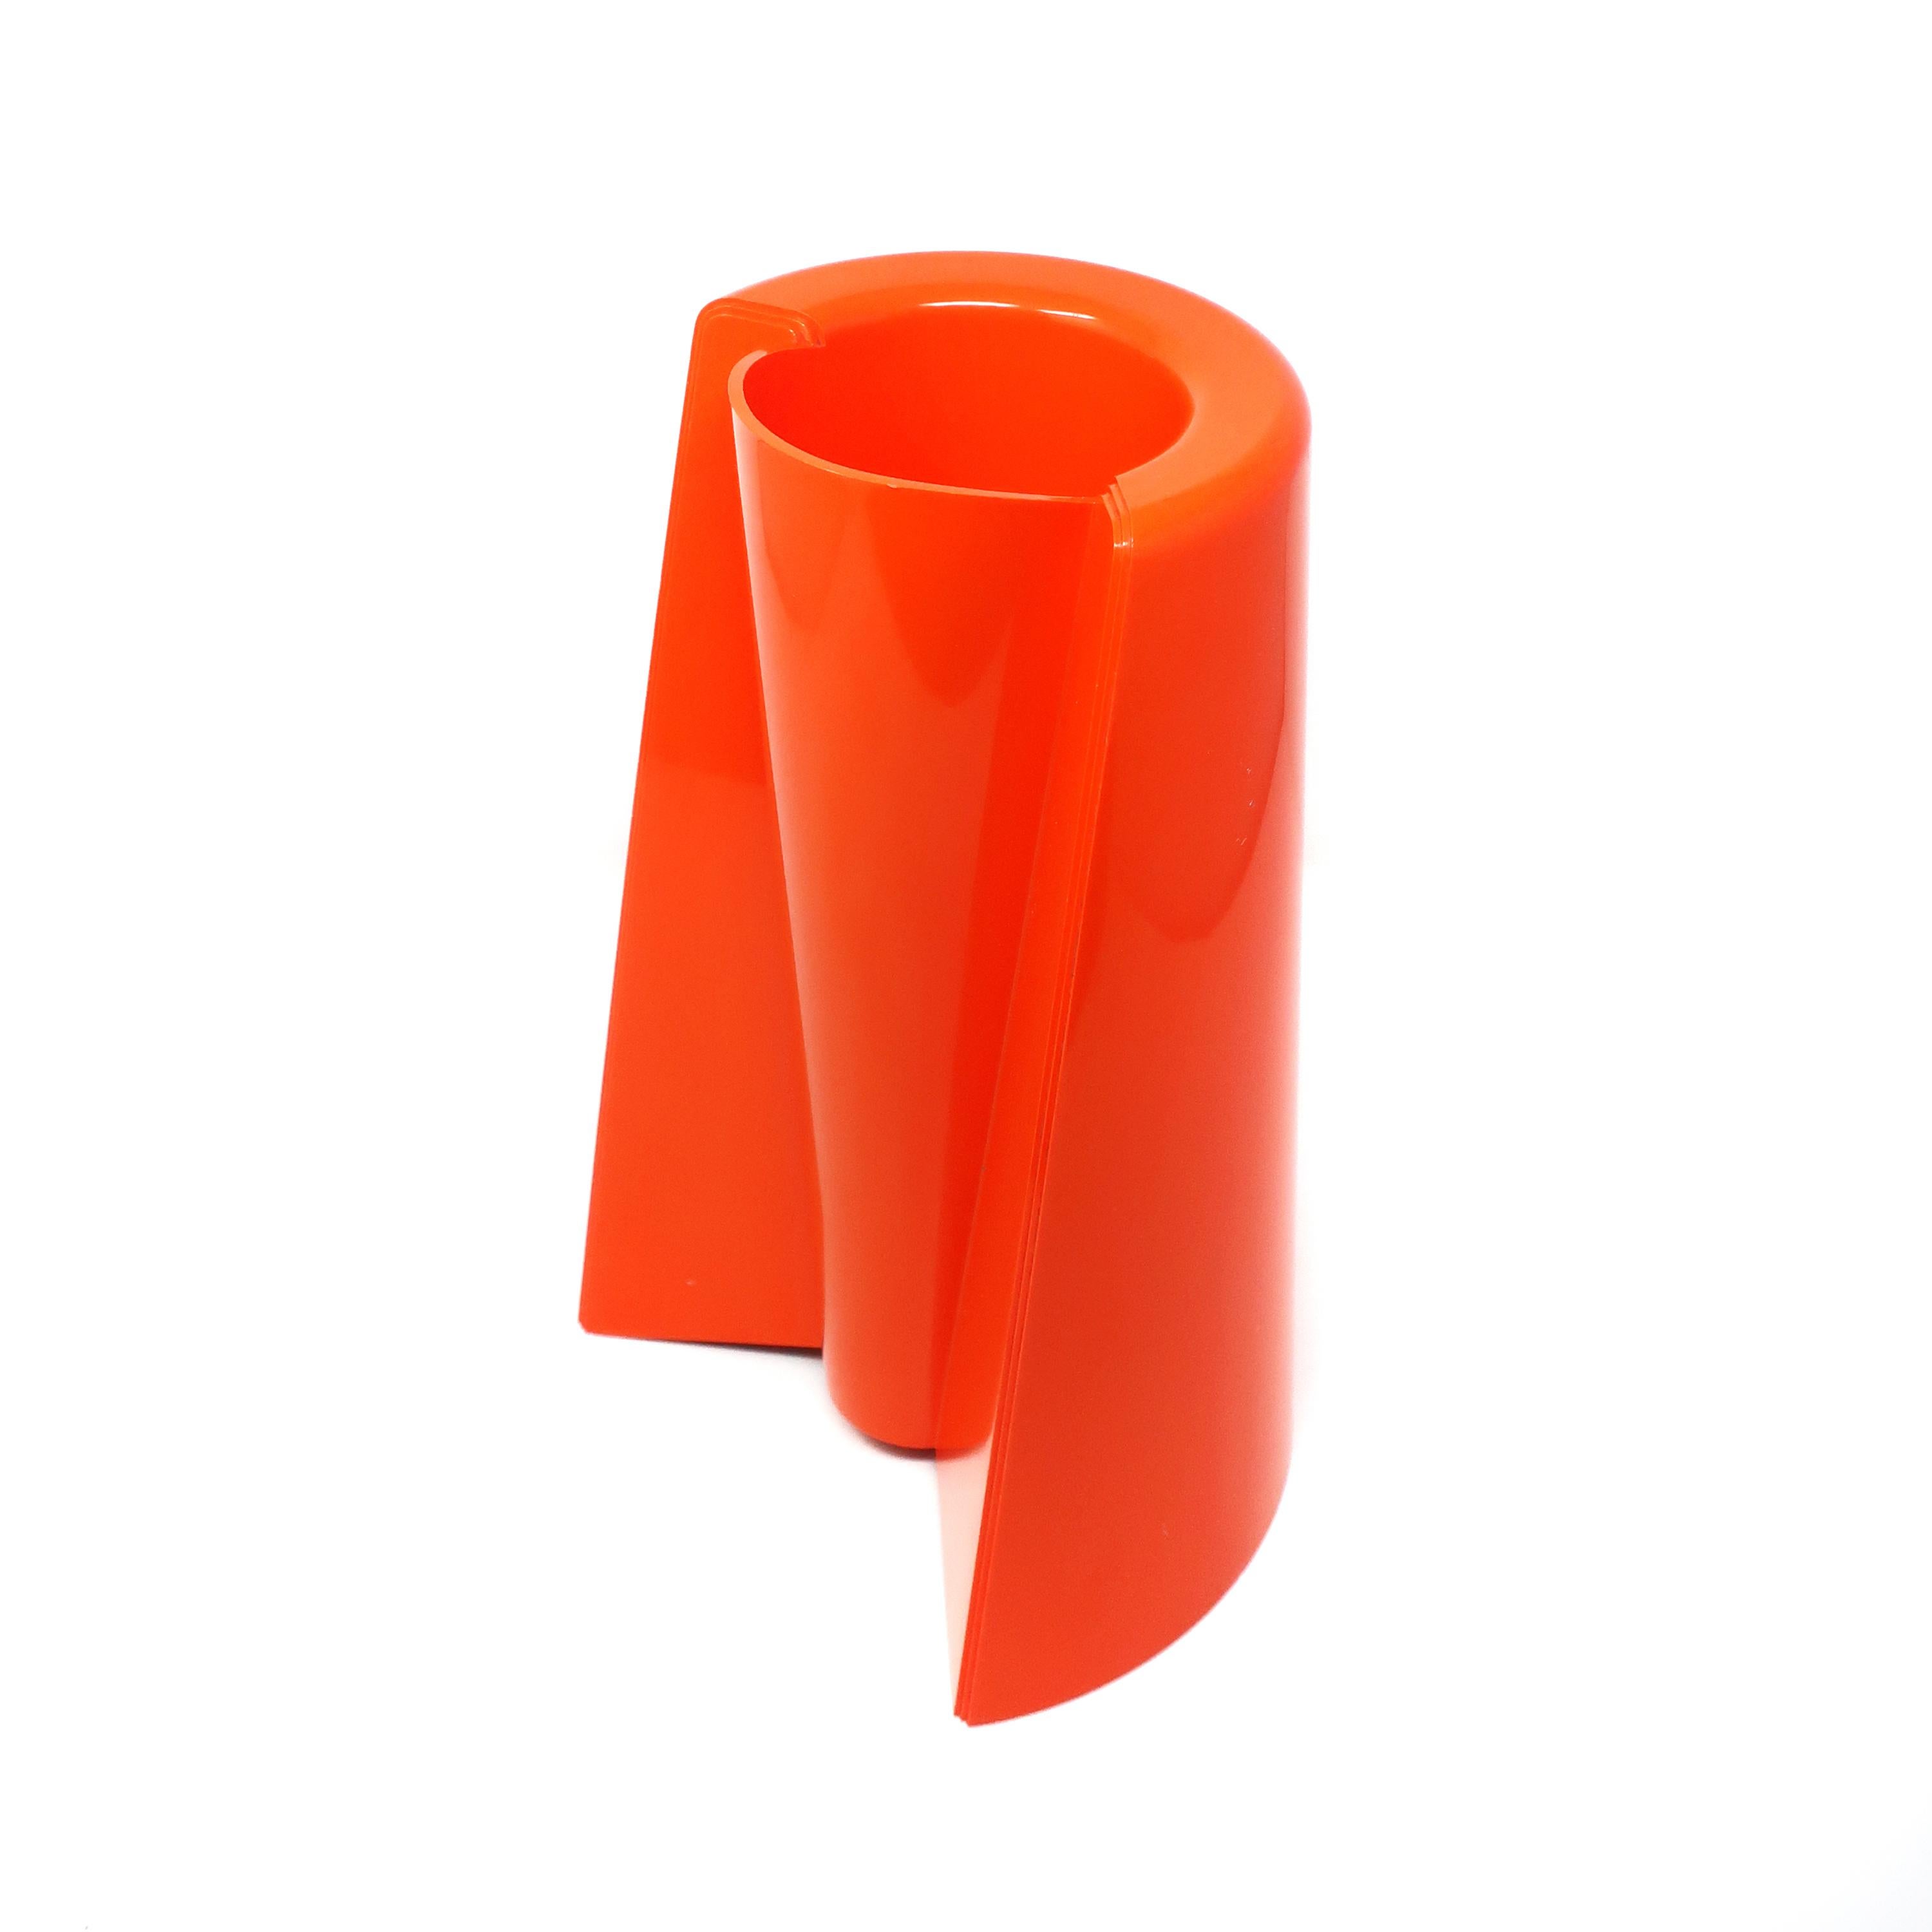 Often described as one of his most notable works, Enzo Mari designed the Pago Pago vase (vase model 3087) for Danese in 1969. (It was later reissued by Alessi, but this is an original Danese production.) Made of injection molded ABS plastic with a